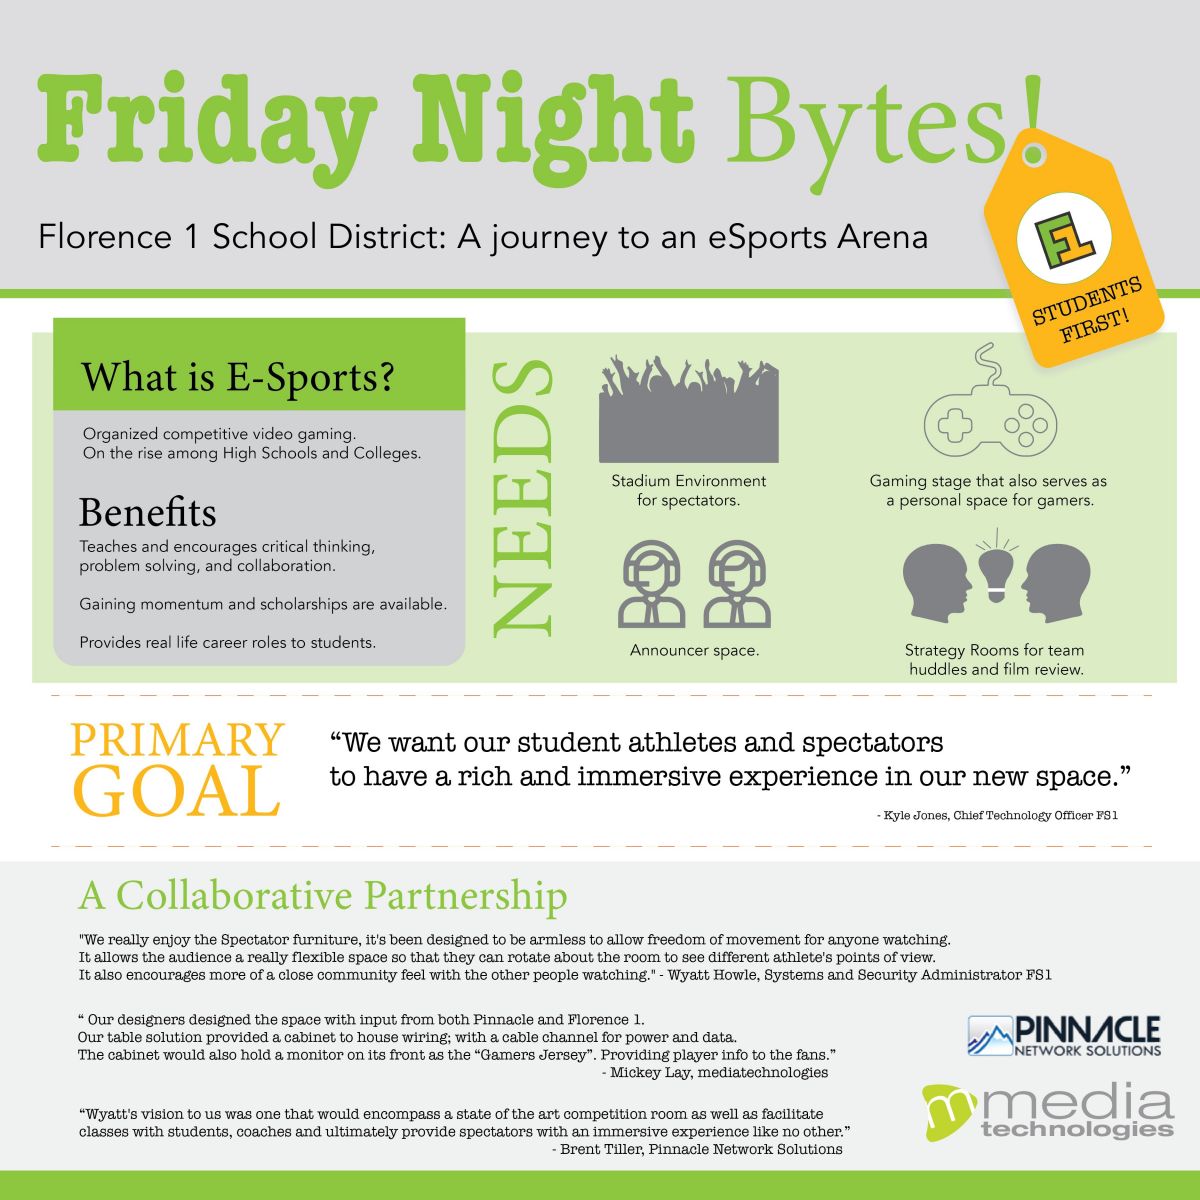 Friday Night Bytes! Florence 1 School District: A journey to an eSports Arena